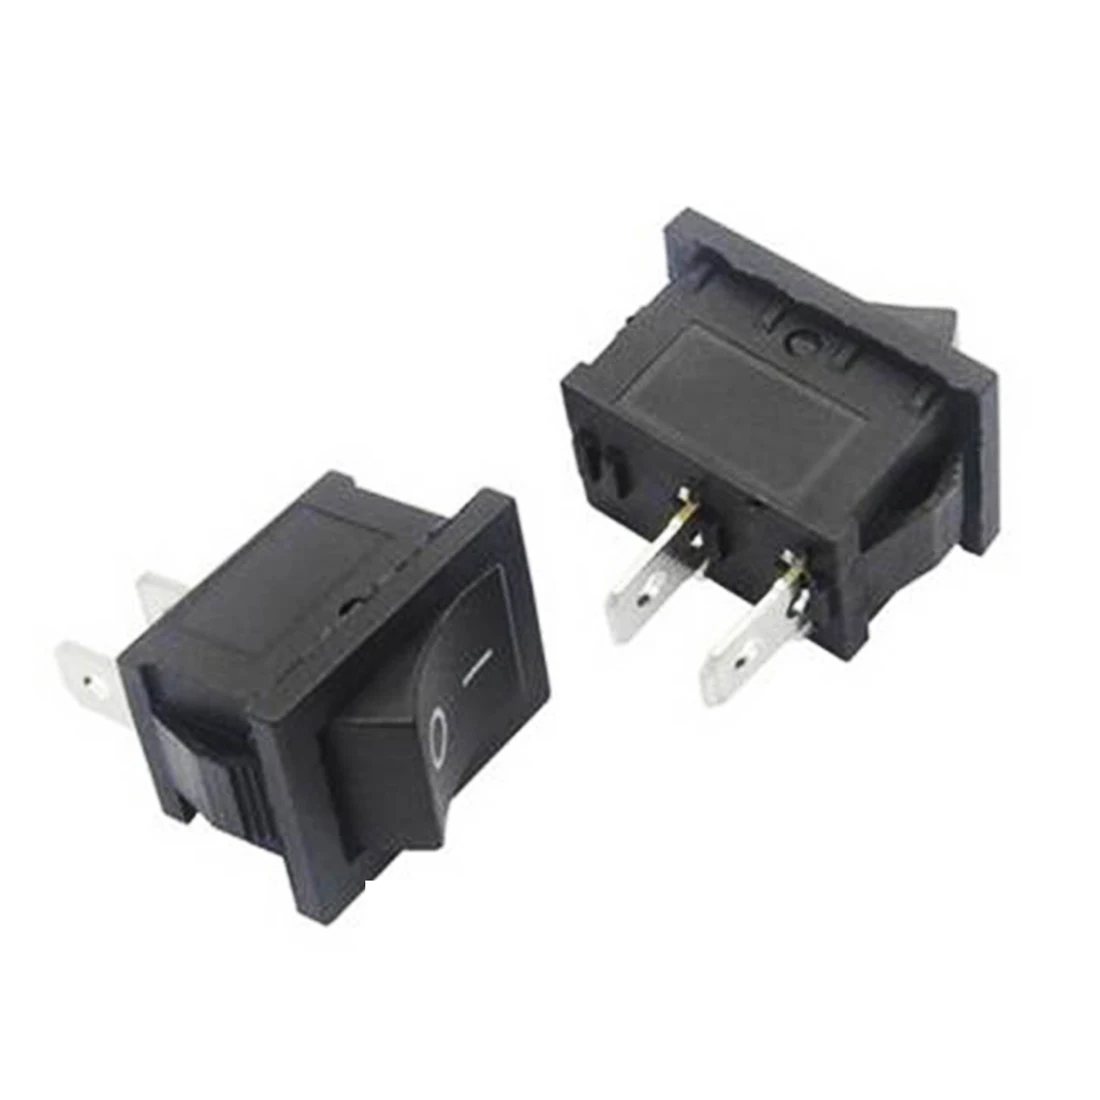 

30pcs 21*15mm Rocker Switch On-Off Switches 2 Pins 2 Gears Button Boat Rocker Key 6A/250V Wholesale Price